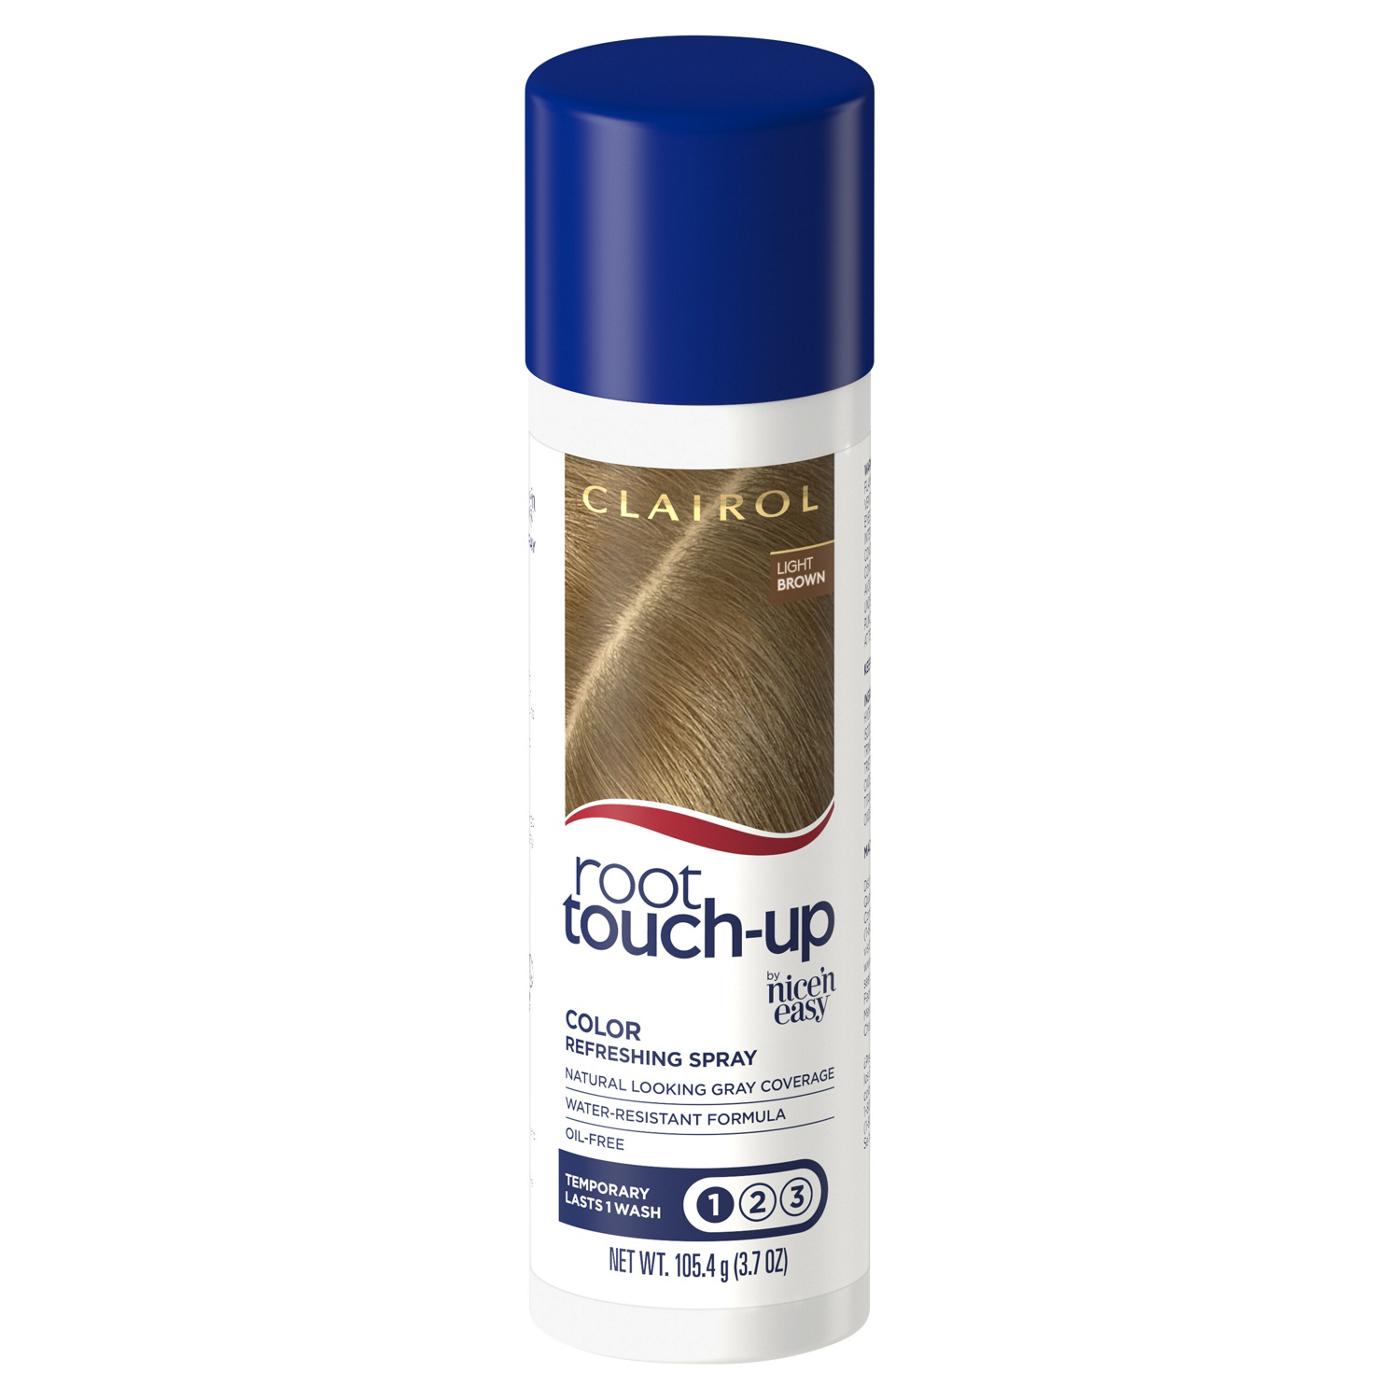 Clairol Root Touch-Up Color Refreshing Spray Light Brown; image 1 of 3